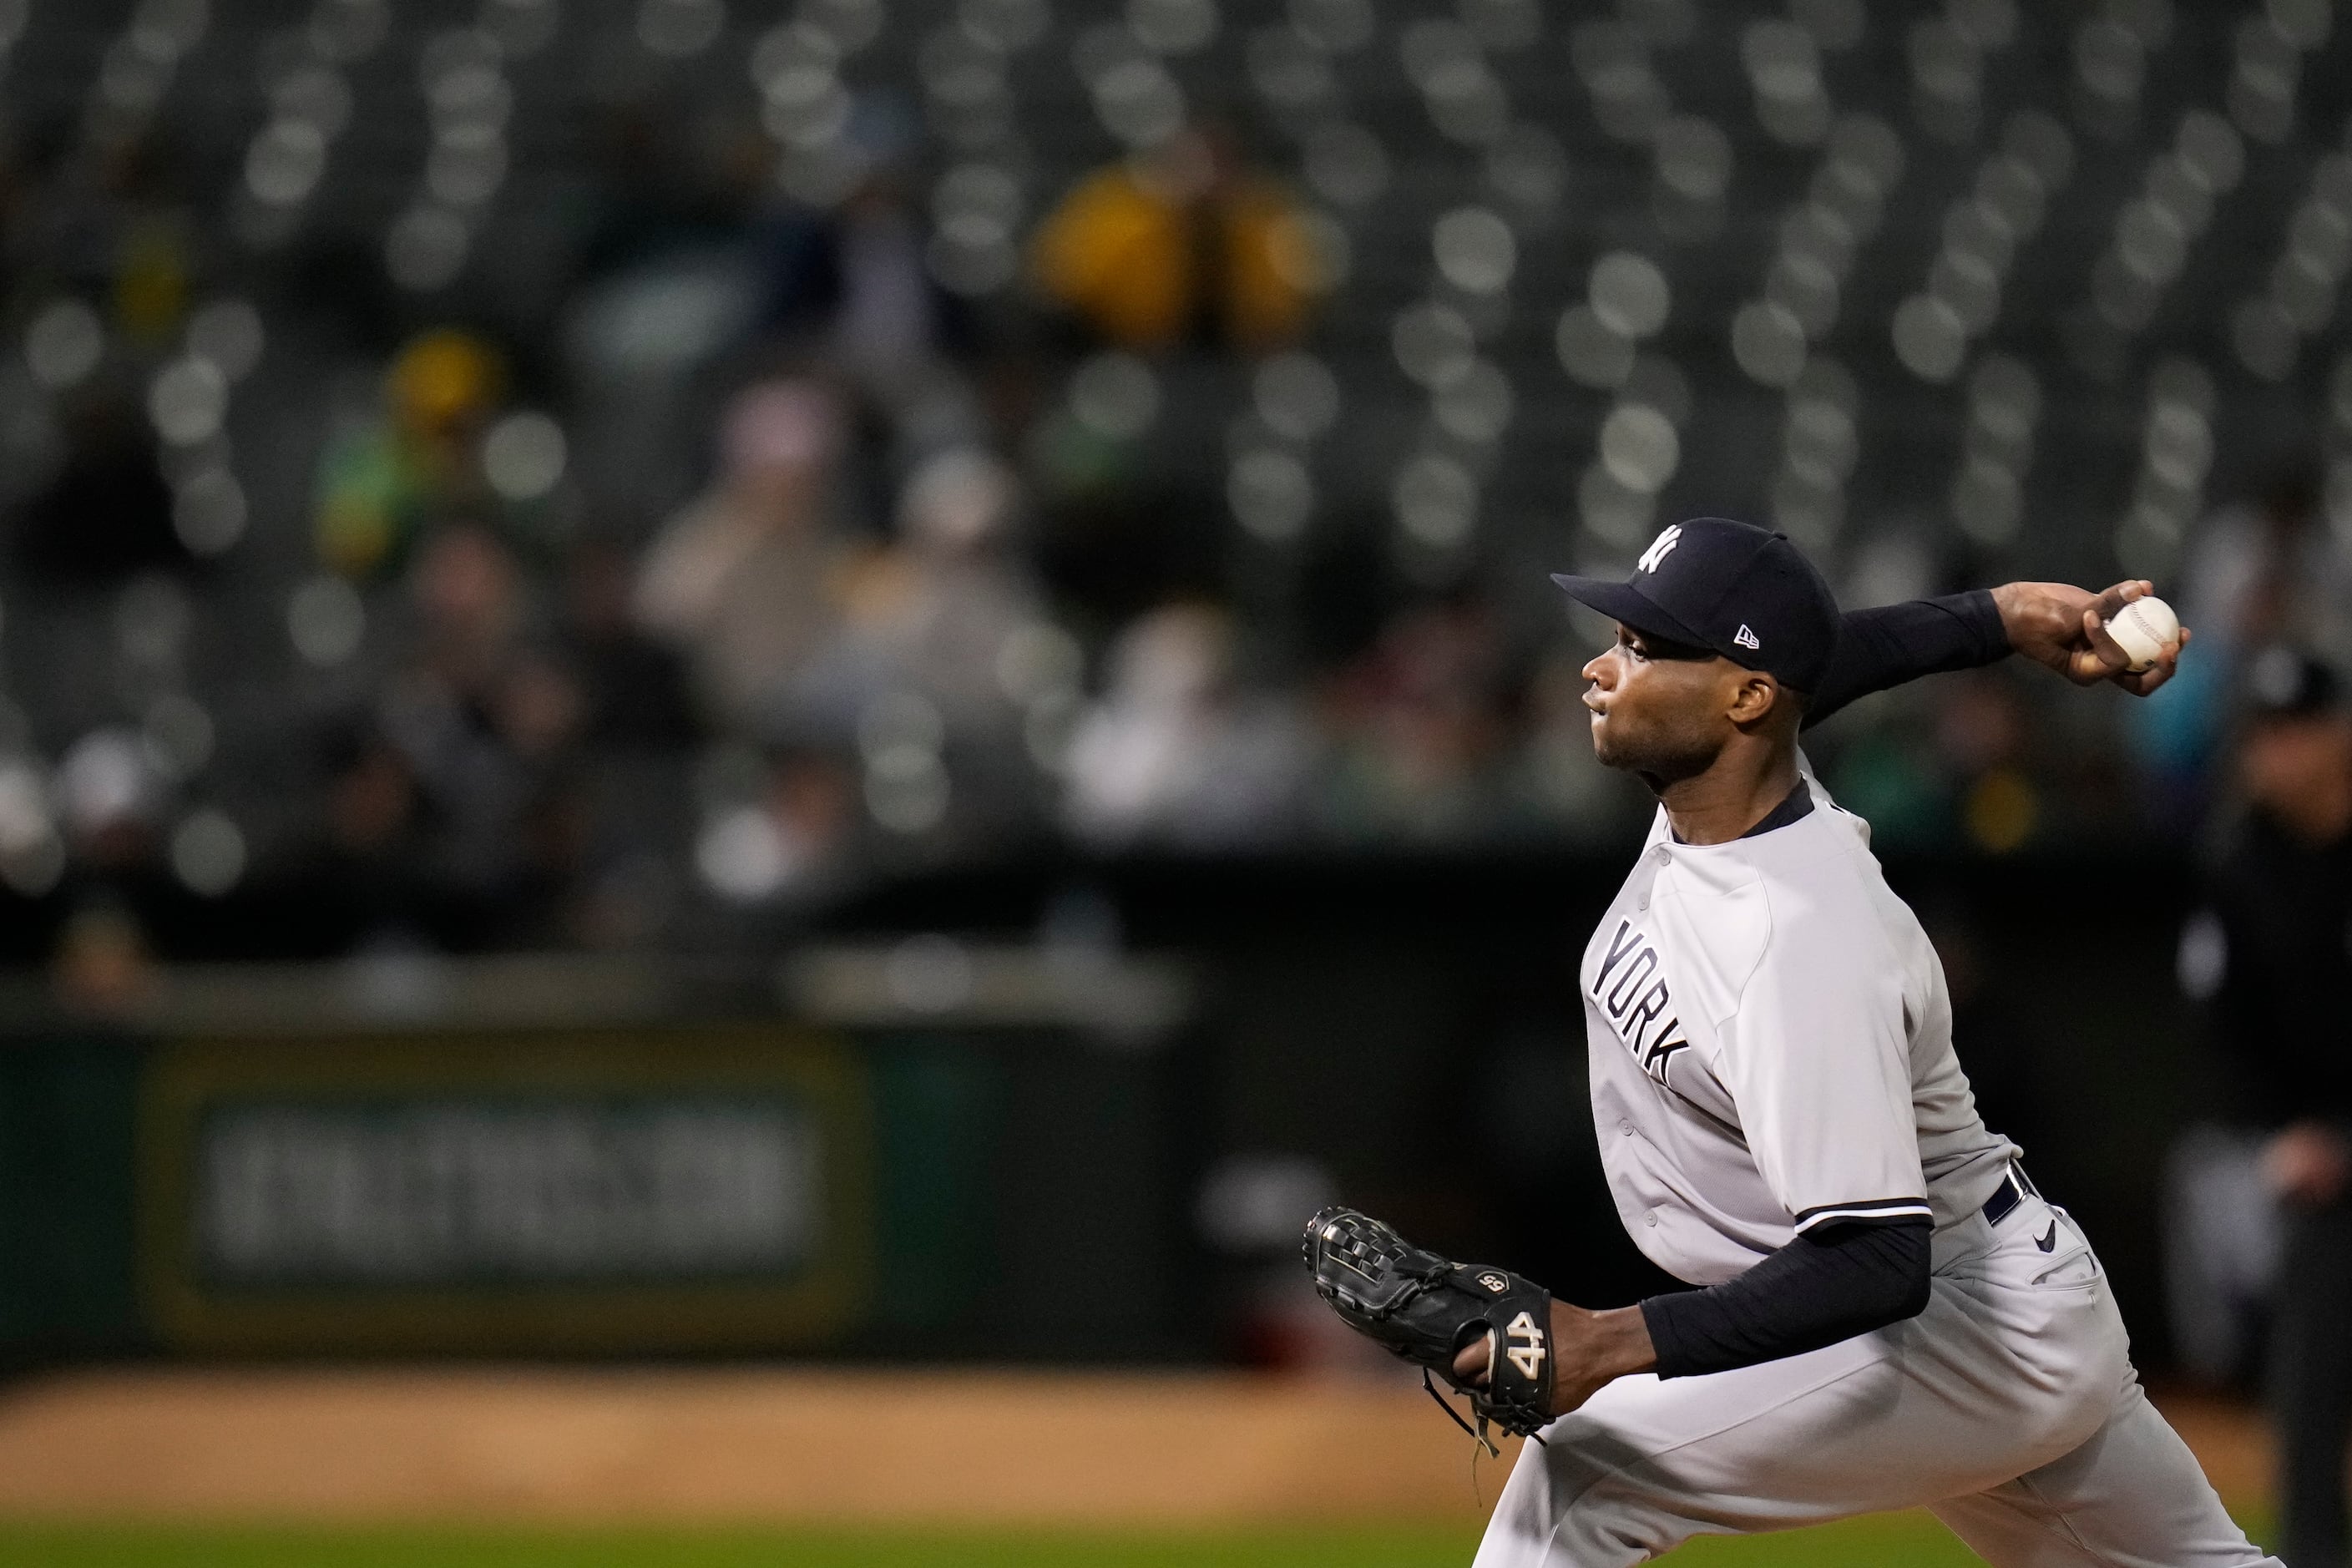 Yankees pitcher Domingo Germán throws perfect game vs. Oakland